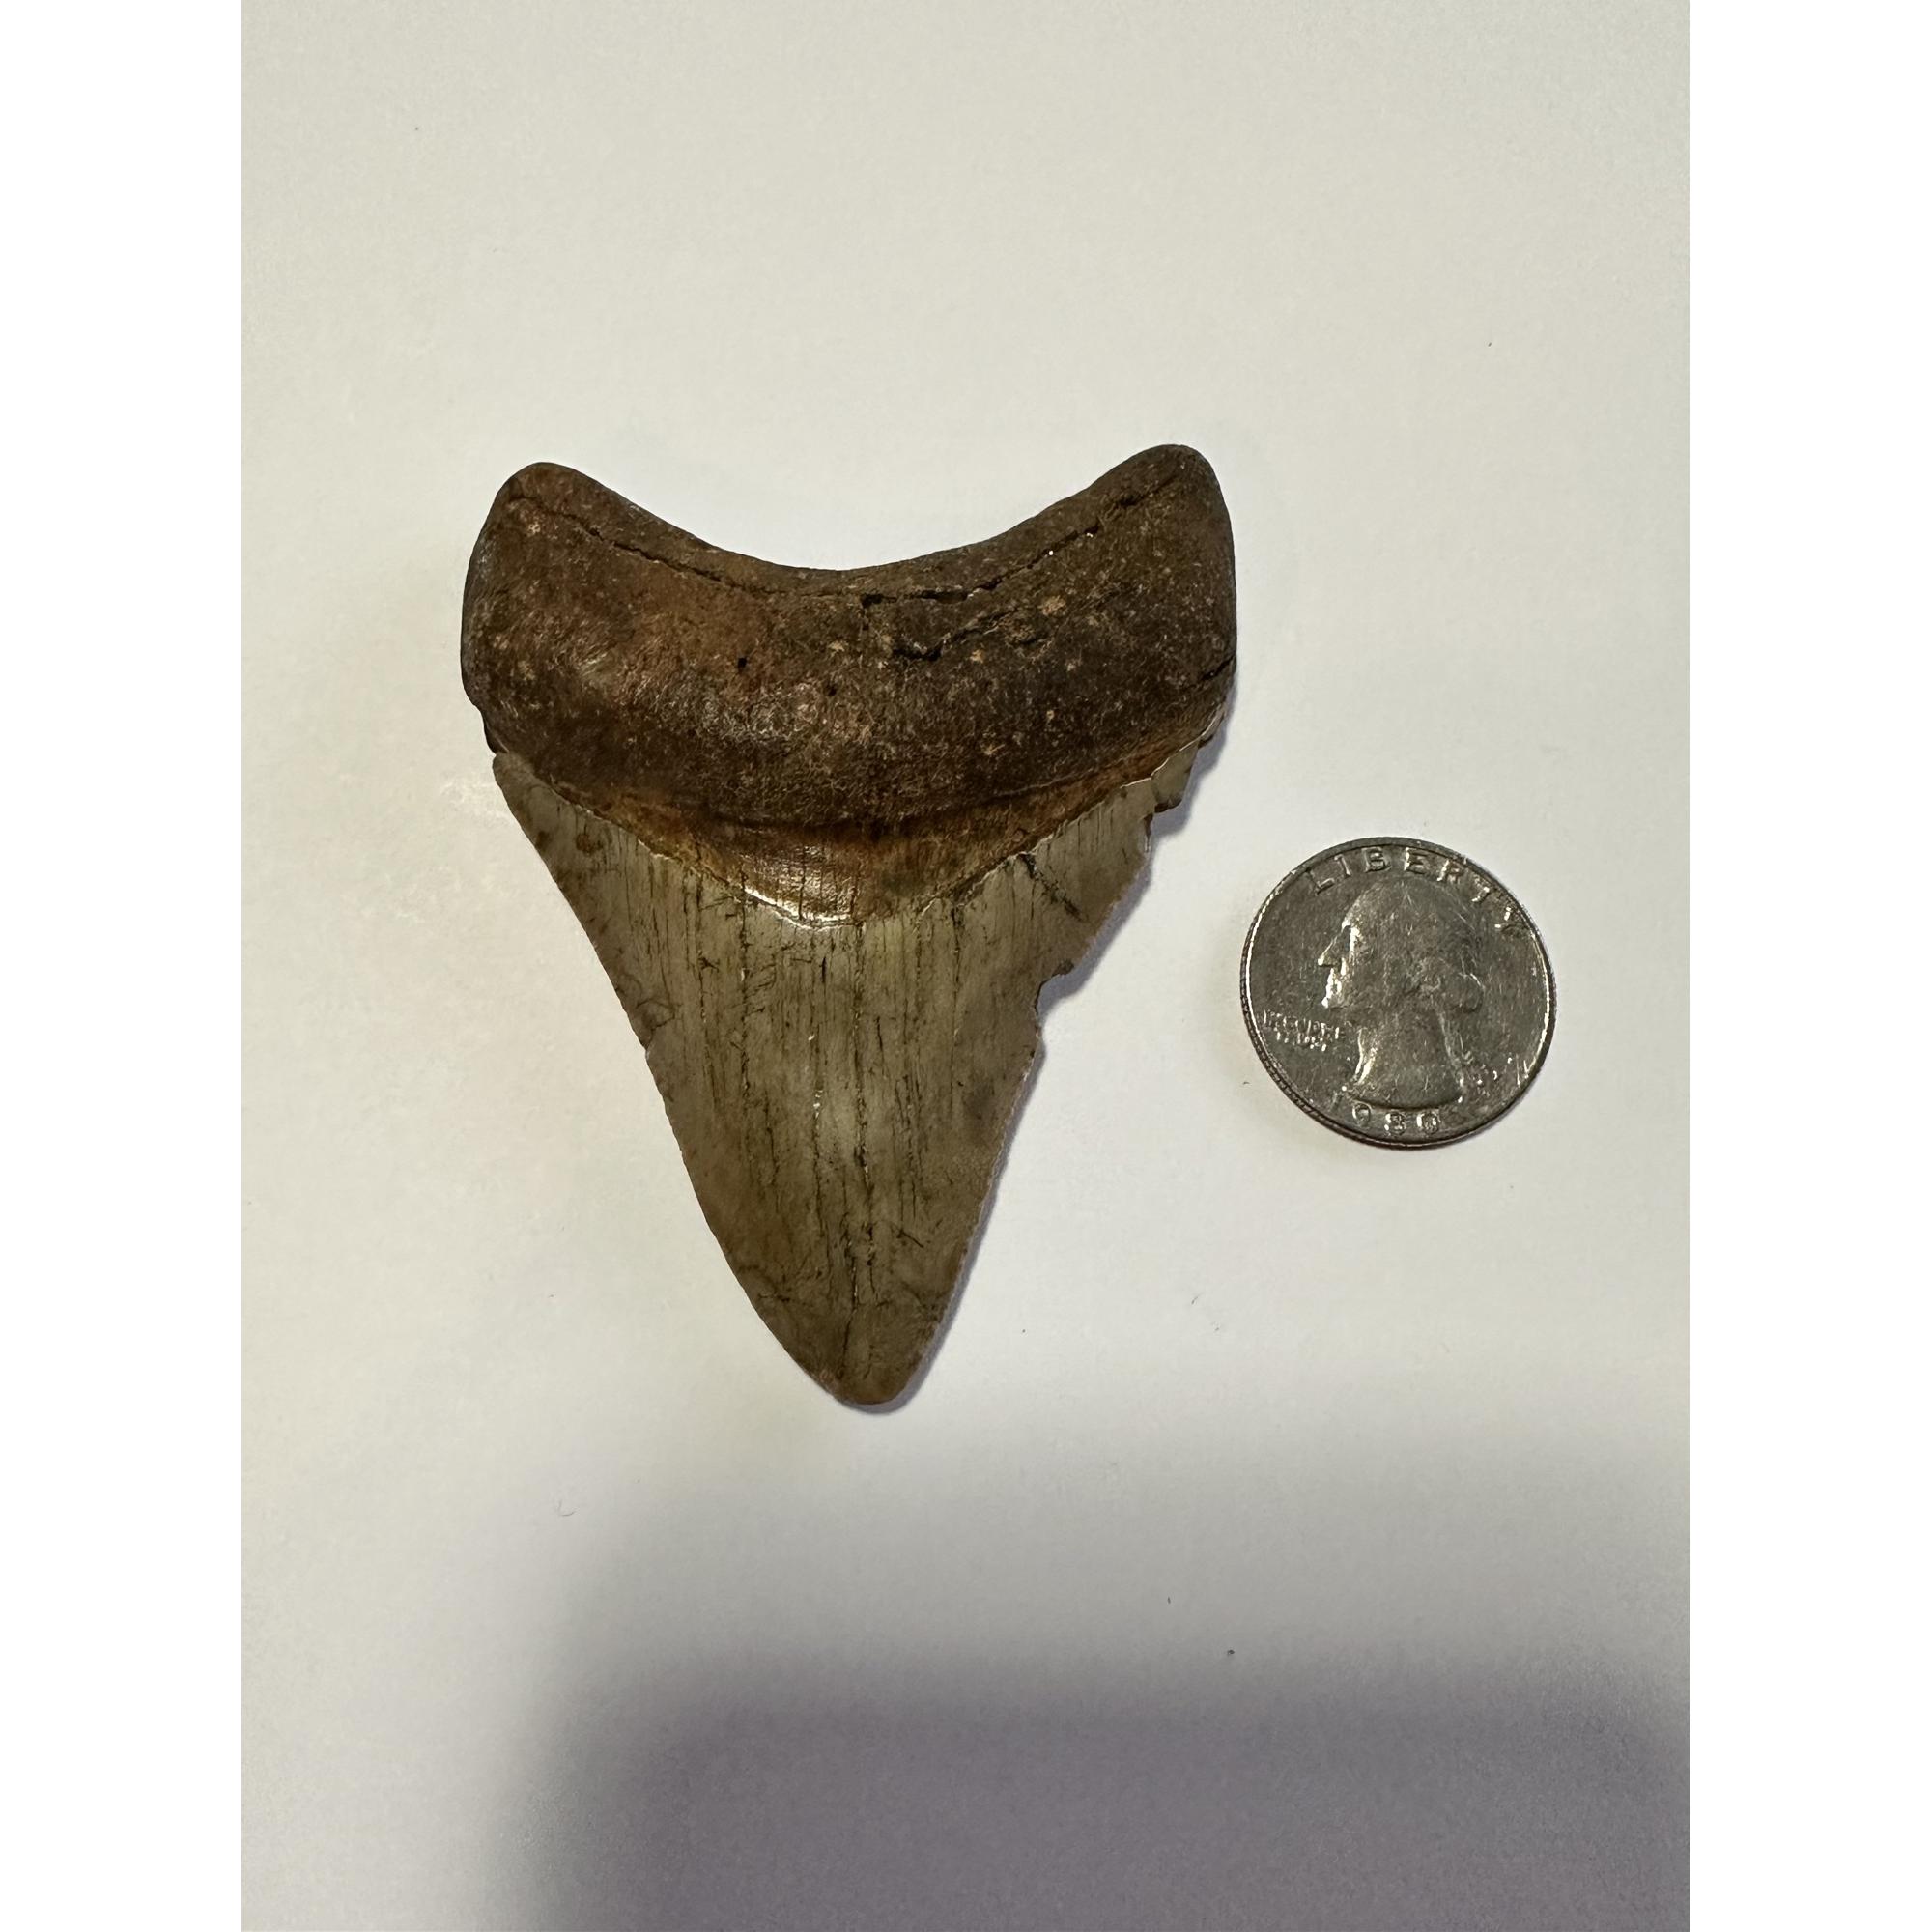 Gorgeous gold color megalodon tooth 3.20”, South Carolina